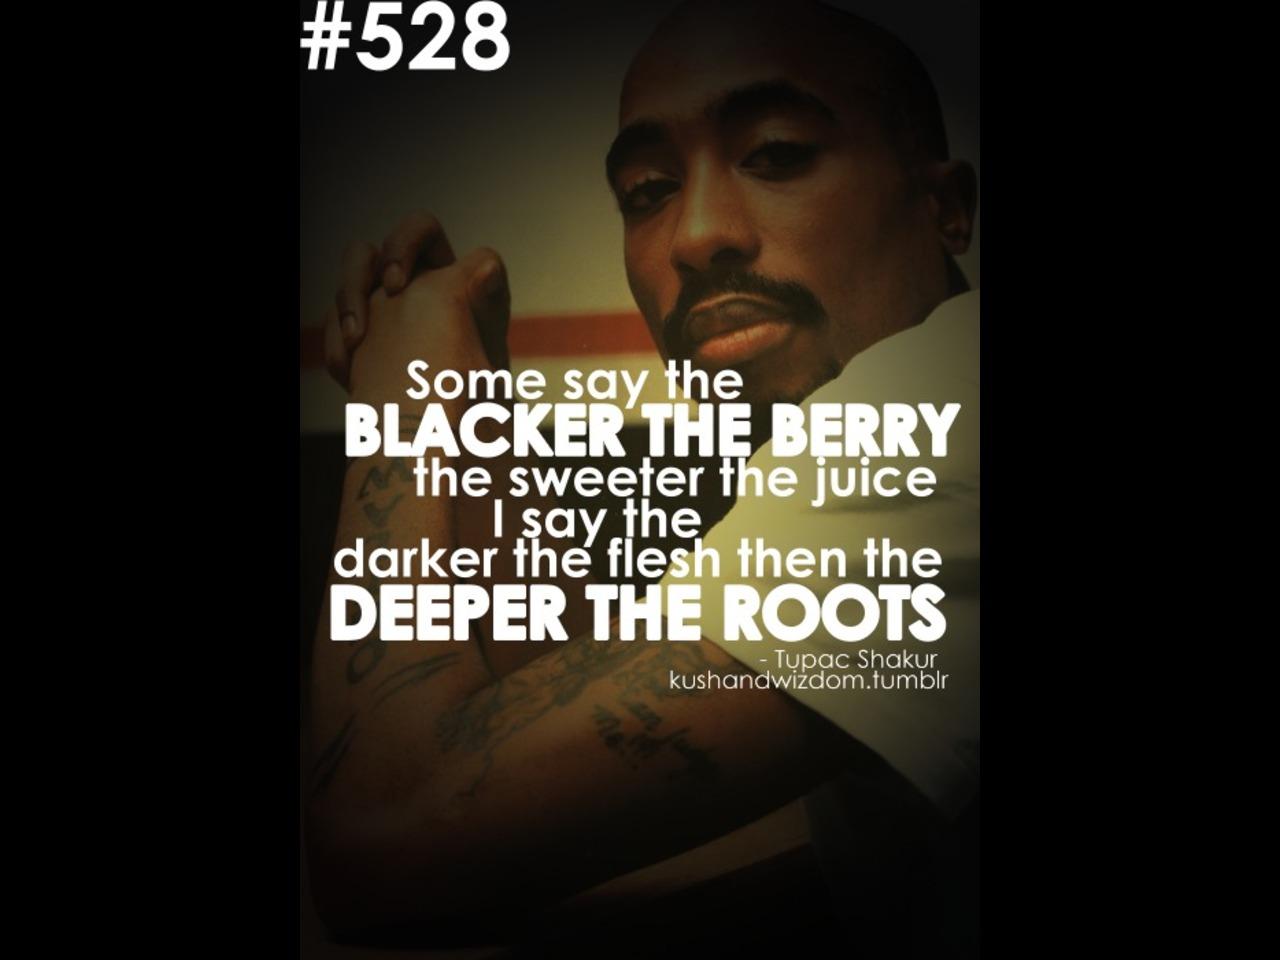 Tupac Shakur Quotes About Haters. QuotesGram Quotes